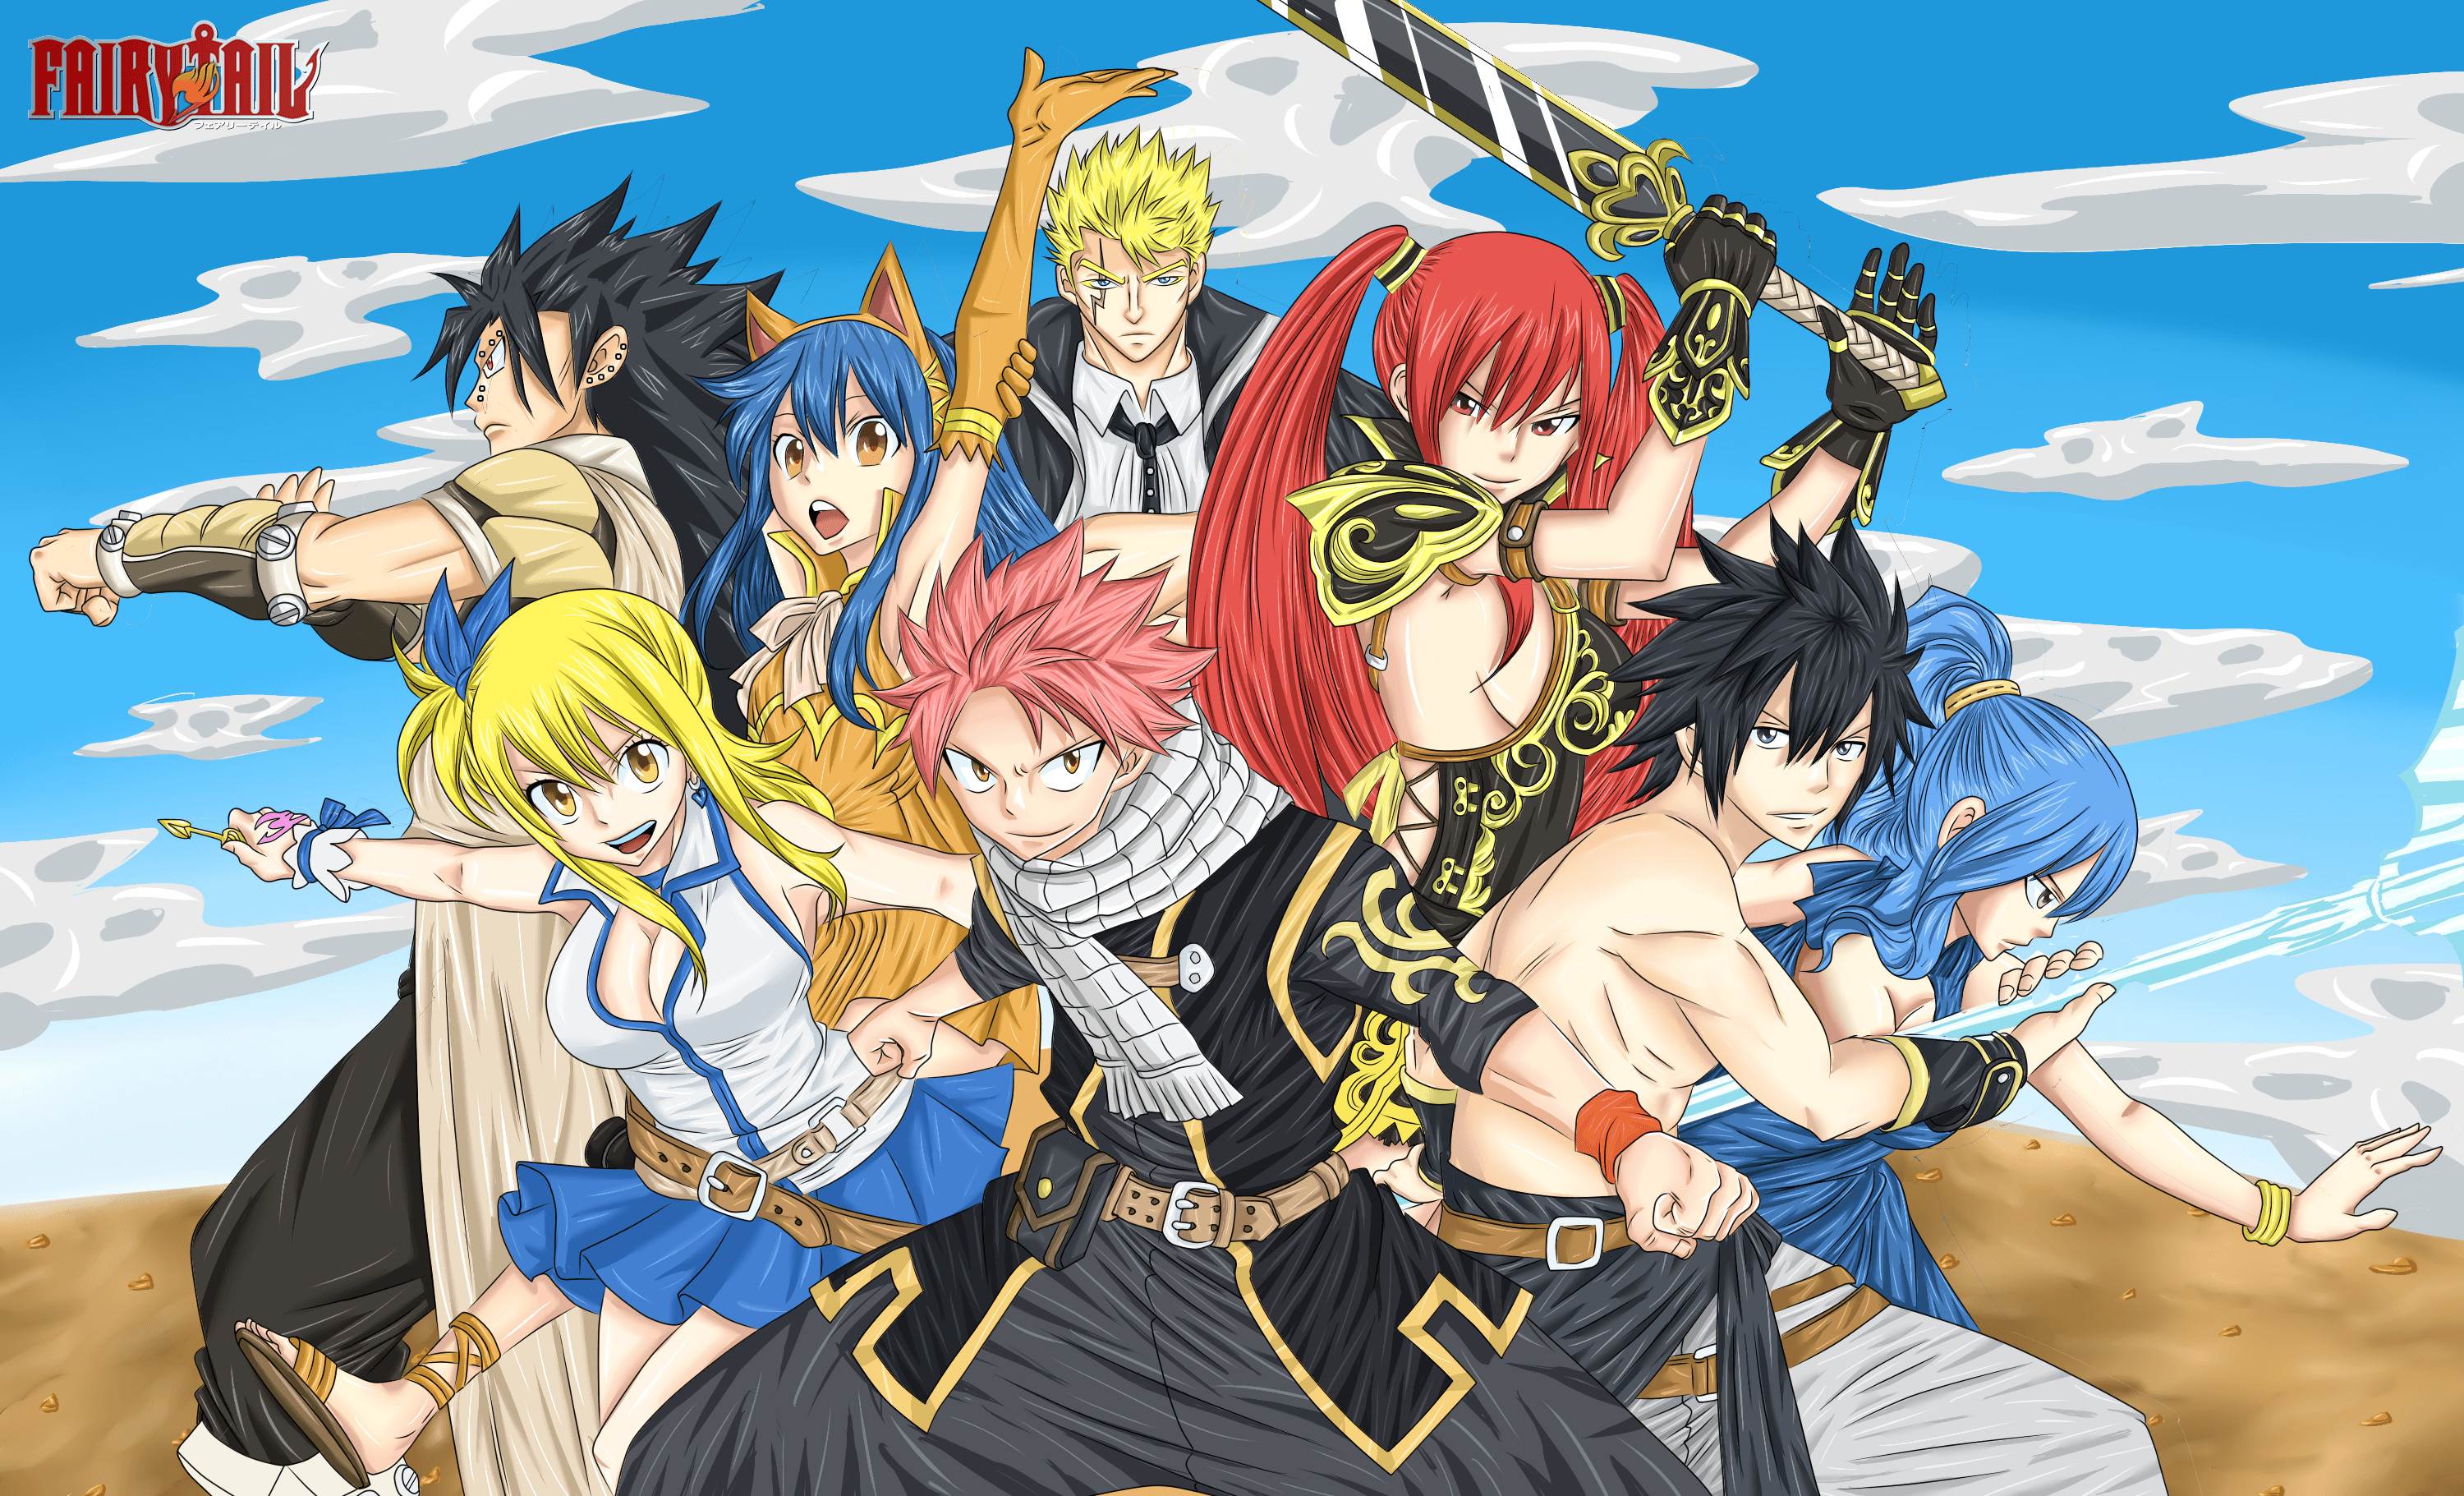 3000x1821 1920x1080 Fairy Tail HD Wallpapers Backgrounds Wallpaper 1920Ã1080 Fairytail  ...">